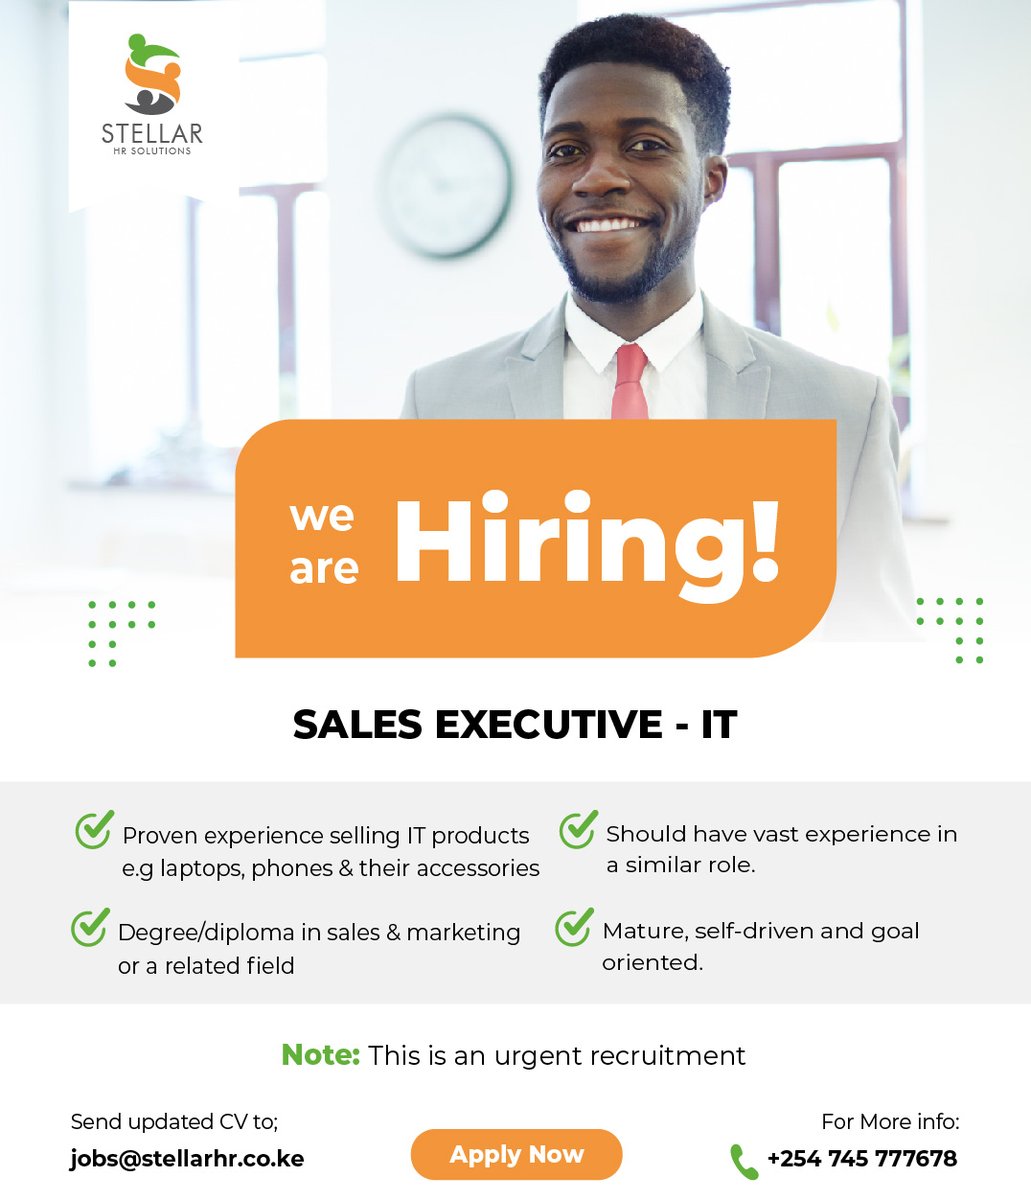 #wearehiring

Are you looking for an exciting opportunity as an Sales Executive?

 Here's an opportunity awaiting you!

Experience selling IT products is required for this role.

Apply now via jobs@stellarhr.co.ke

#salesexecutive #IT #jobs #IkoKaziKE